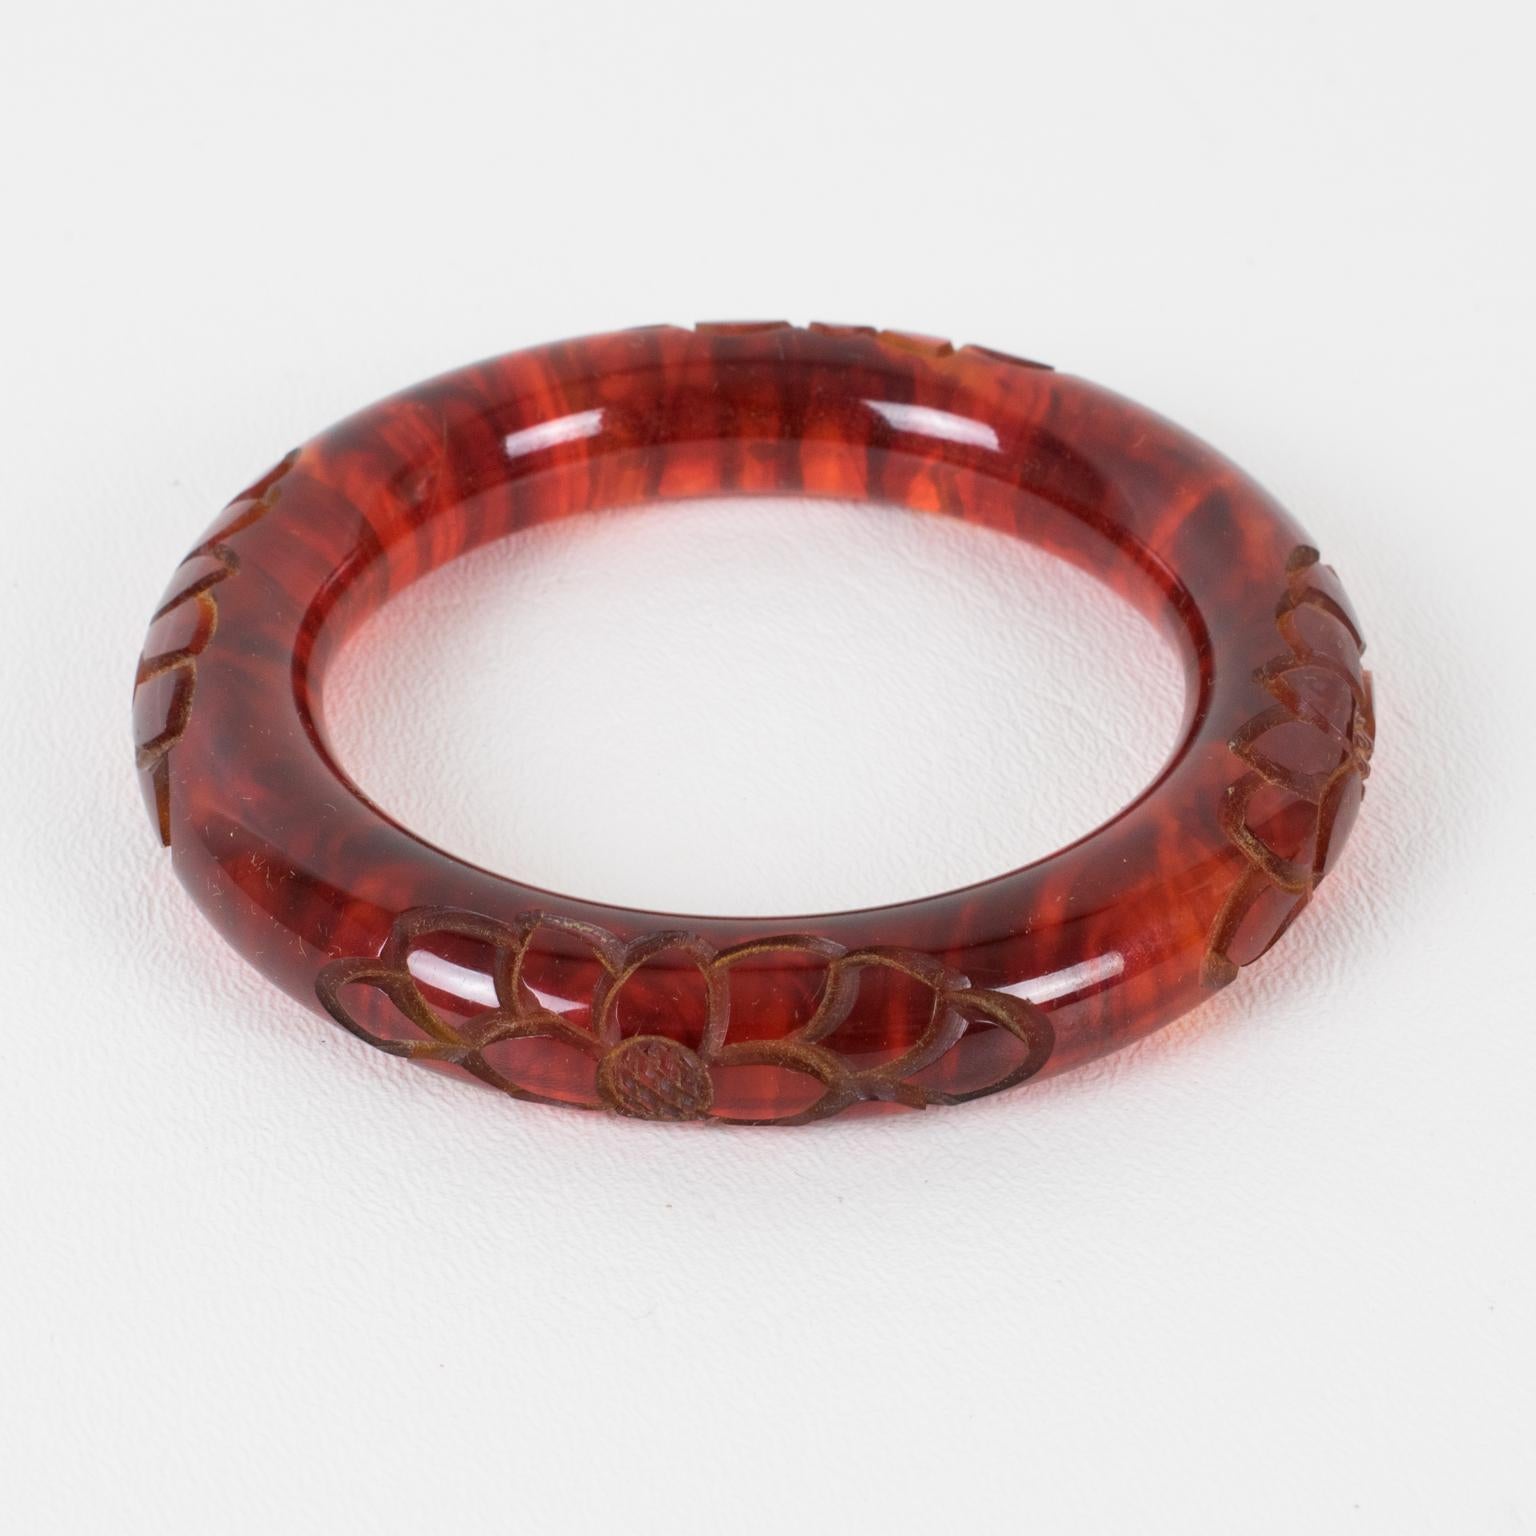 Stunning red tea amber marble Bakelite bracelet bangle. Chunky rounded domed shape with a deep floral carving all around. Intense orange-red color with lots of cloudy swirling and translucency.
Measurements: Inside across is 2.50 in diameter (6.4